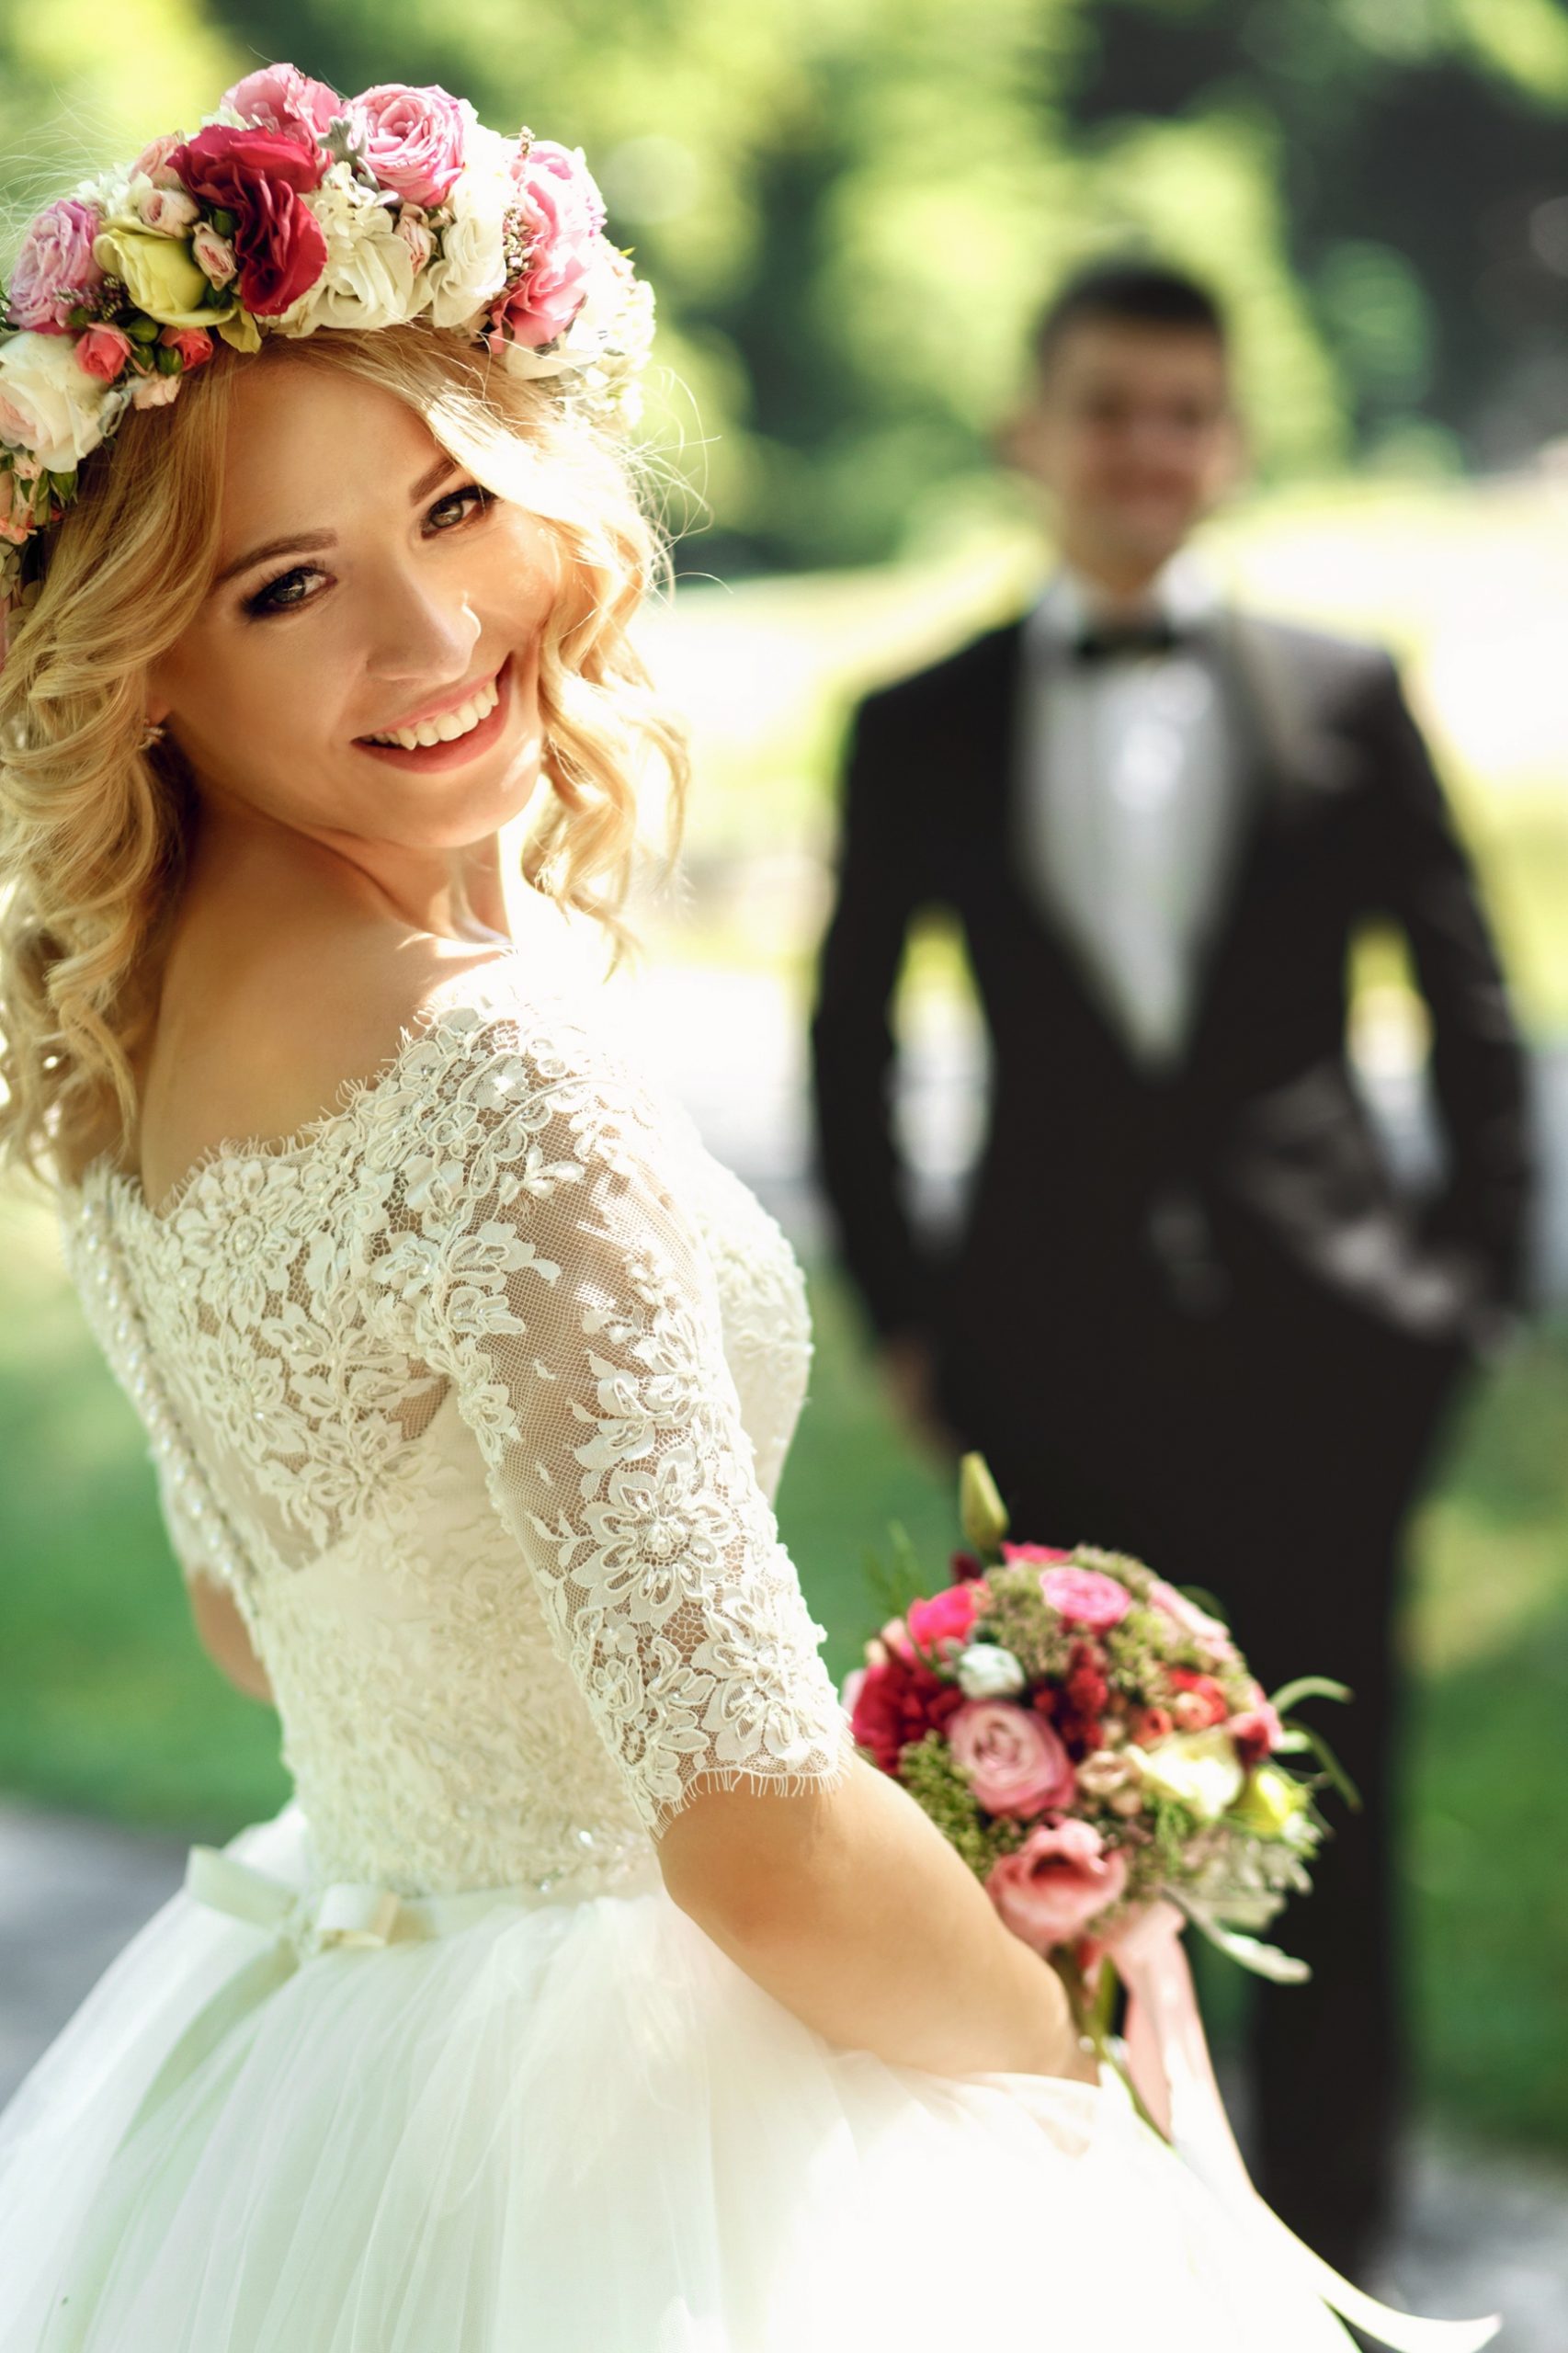 A beautiful bride smiling with her back to the camera. She is wearing a flower crown and holding a matching bouquet and in the background stands the groom.